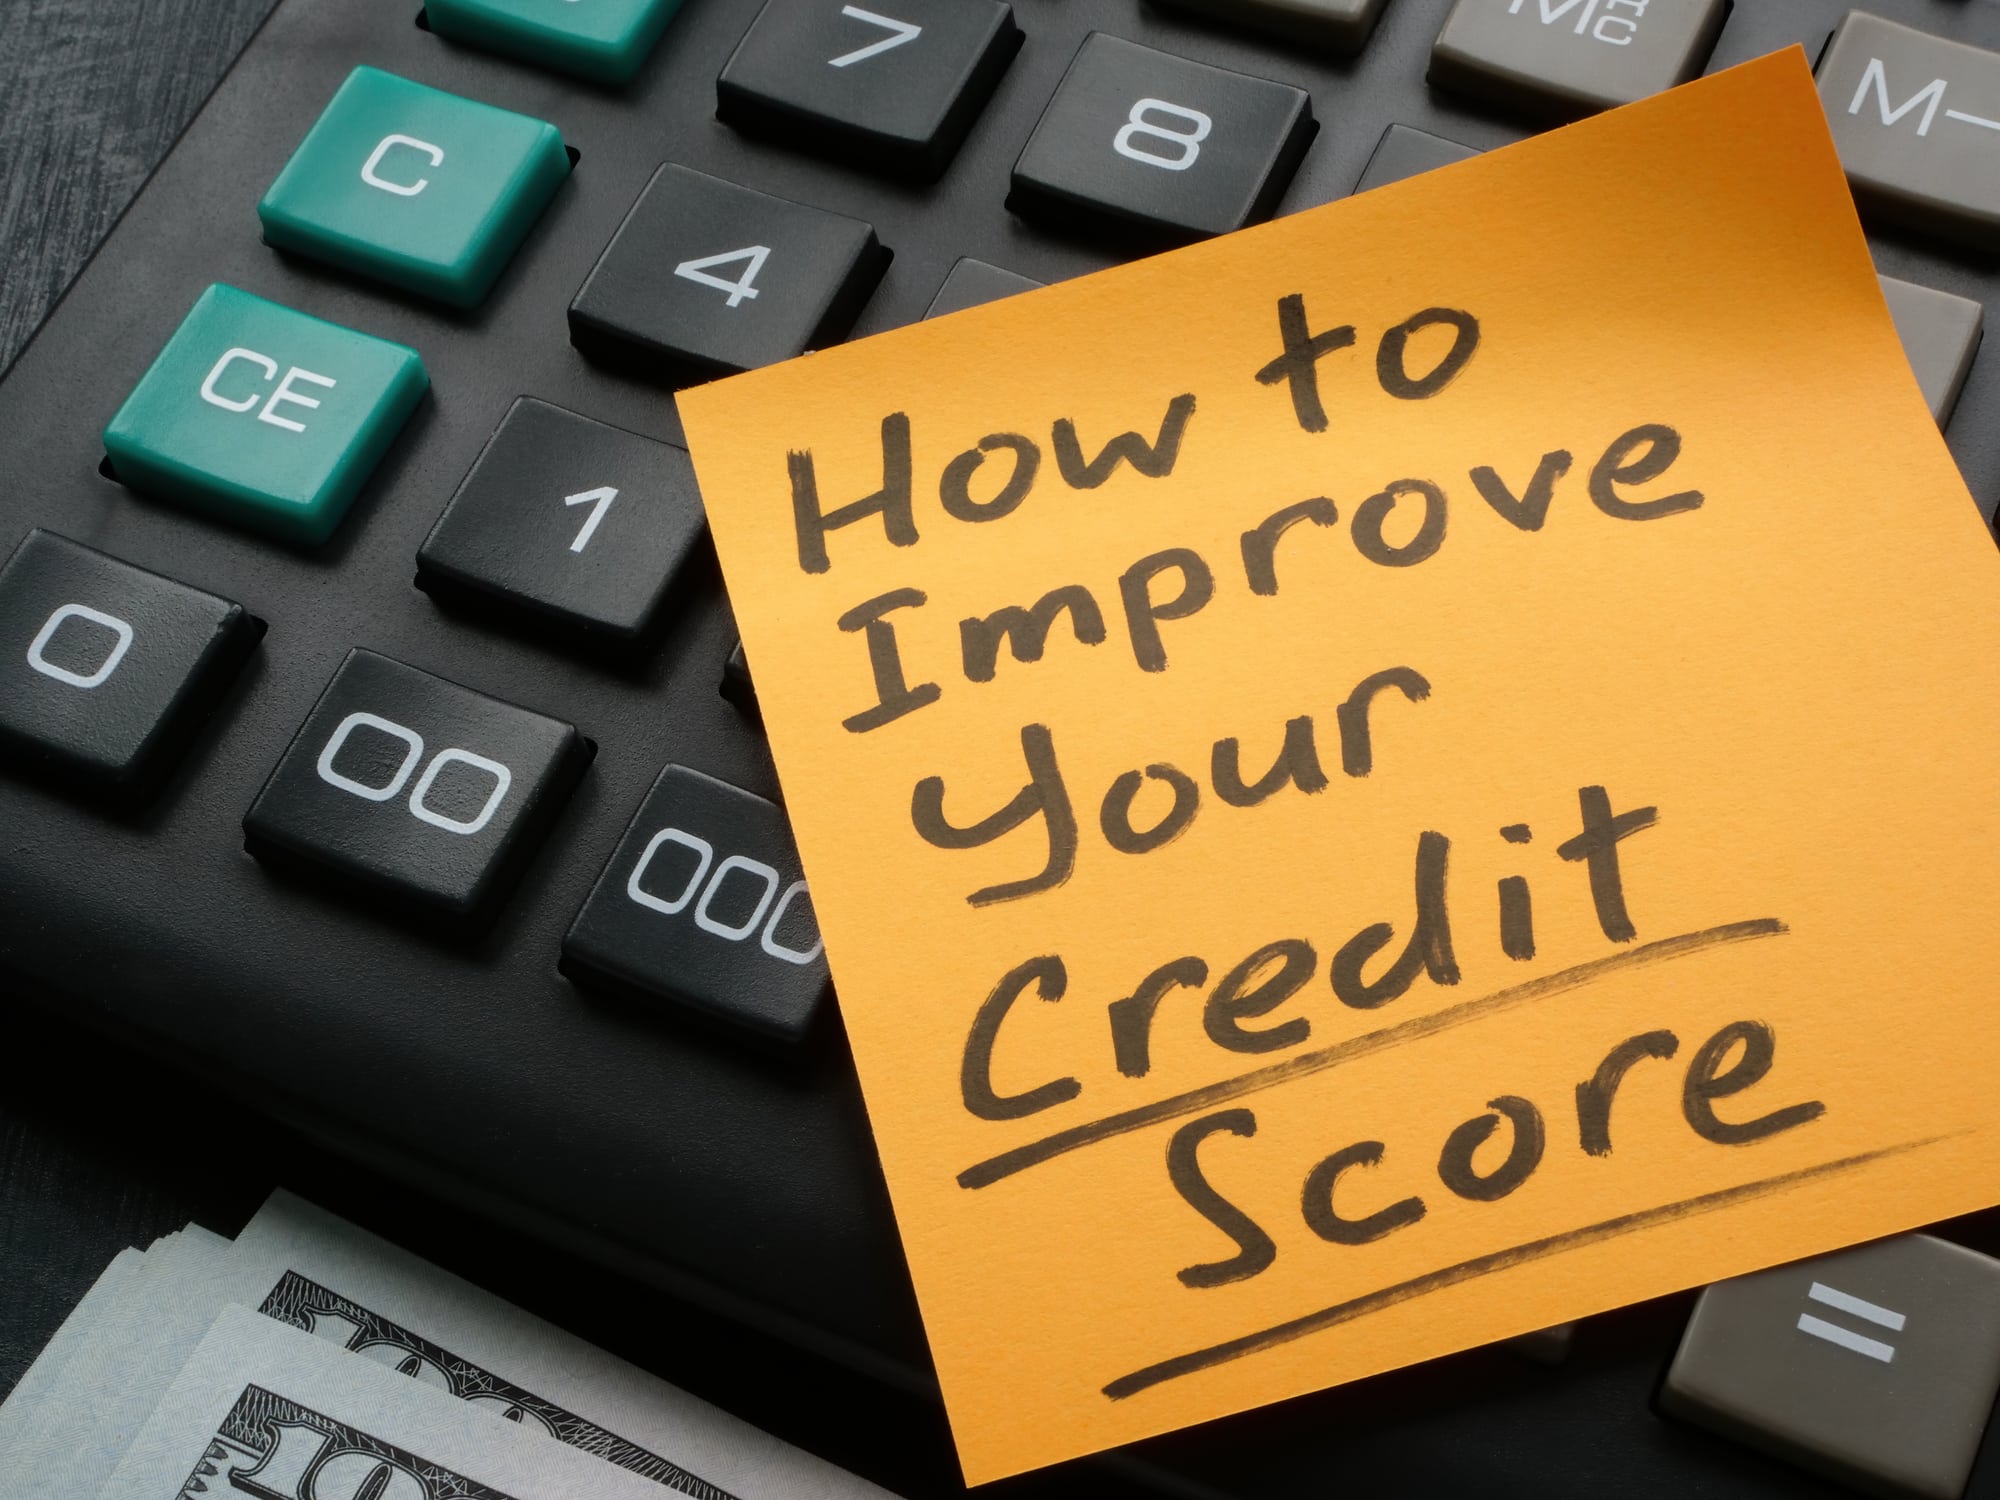 raise your credit score. A Memo stick with How to improve your credit score inscription on the calculator.